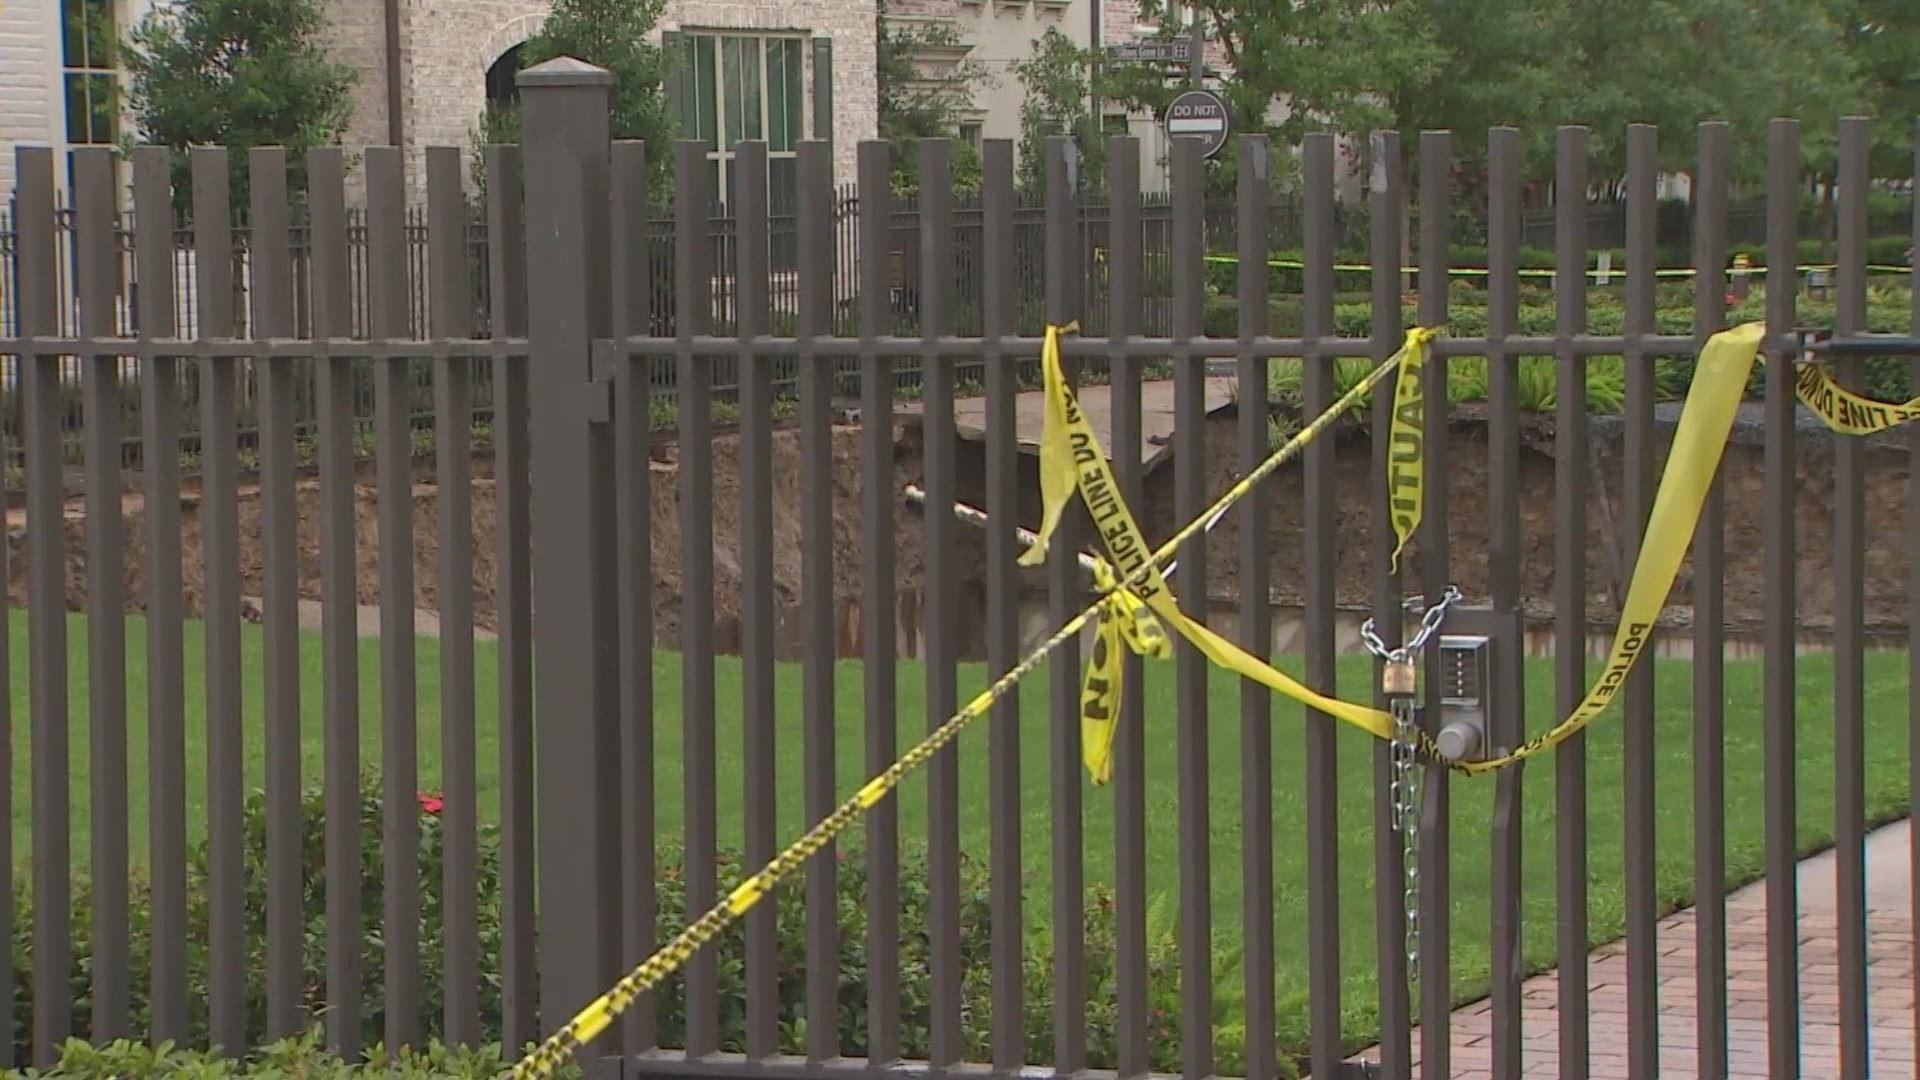 They said a cistern collapsed, causing the sinkhole in the gated community of Memorial Green near the intersection of Memorial Drive and Gessner Road.